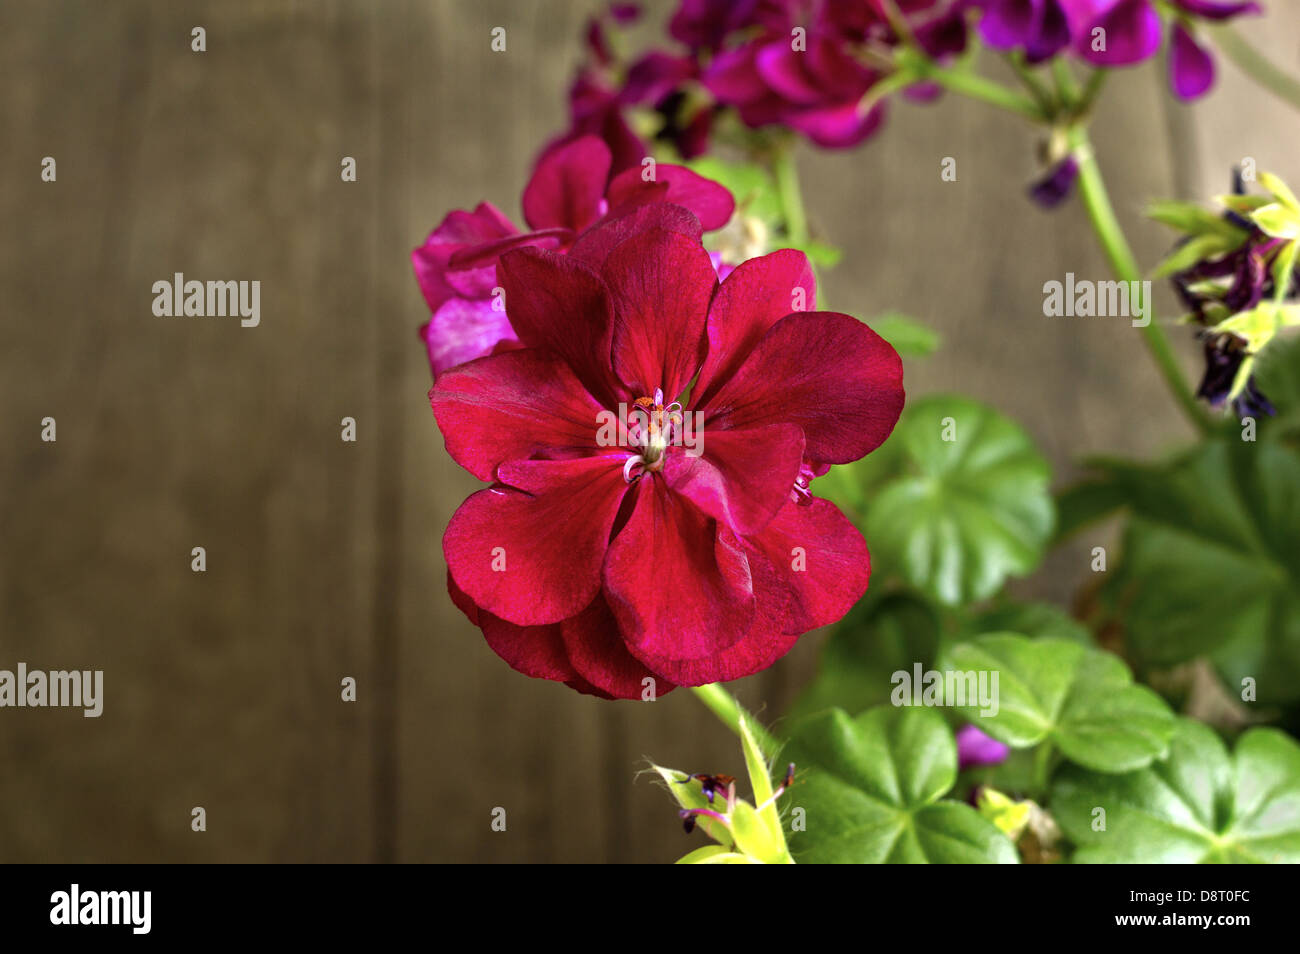 Red geranium flowers in bloom. Shallow depth of field. Stock Photo